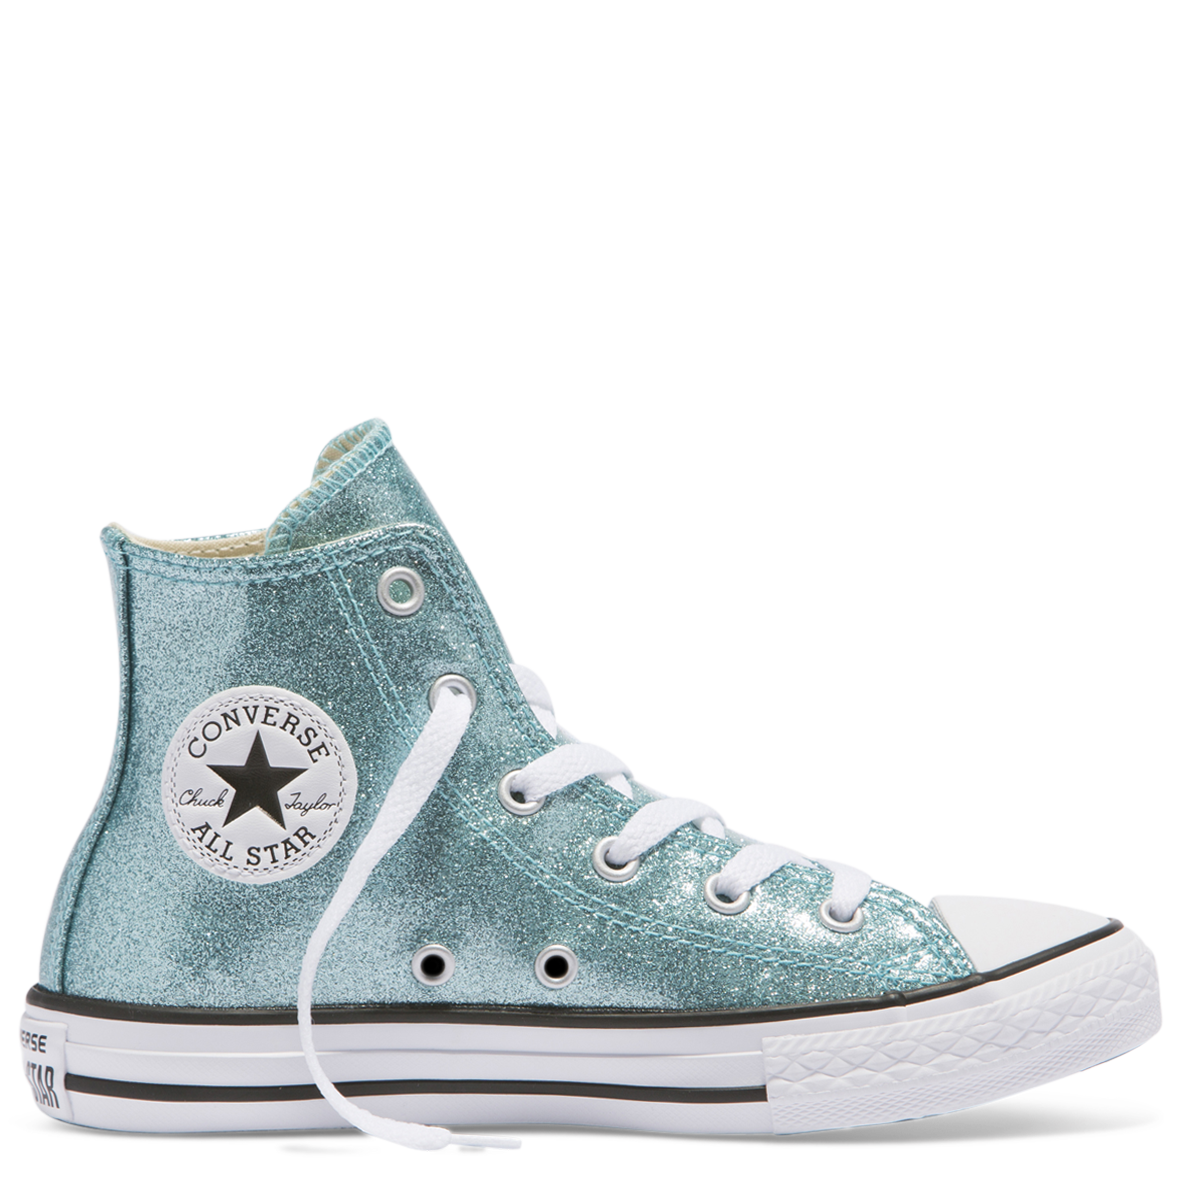 converse turquoise kids